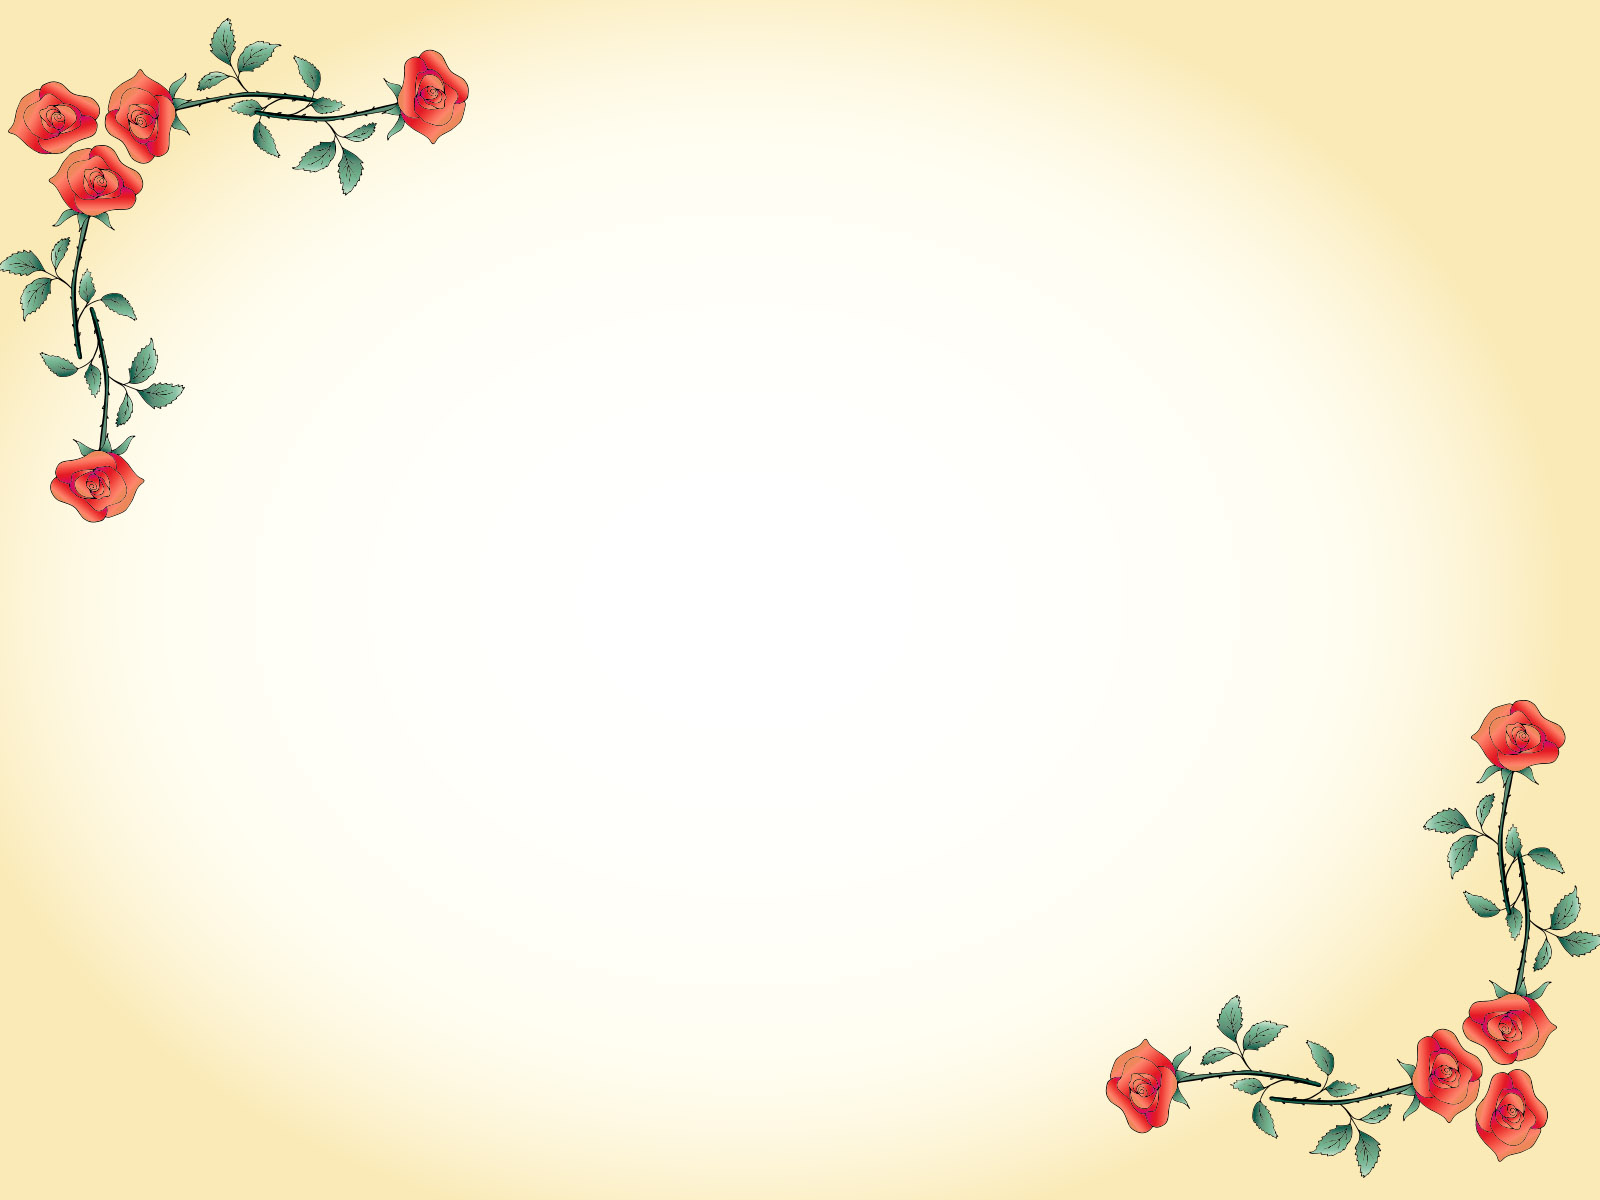 Red Flowers Border Powerpoint Templates - Border & Frames, Flowers, Red, Yellow - Free PPT